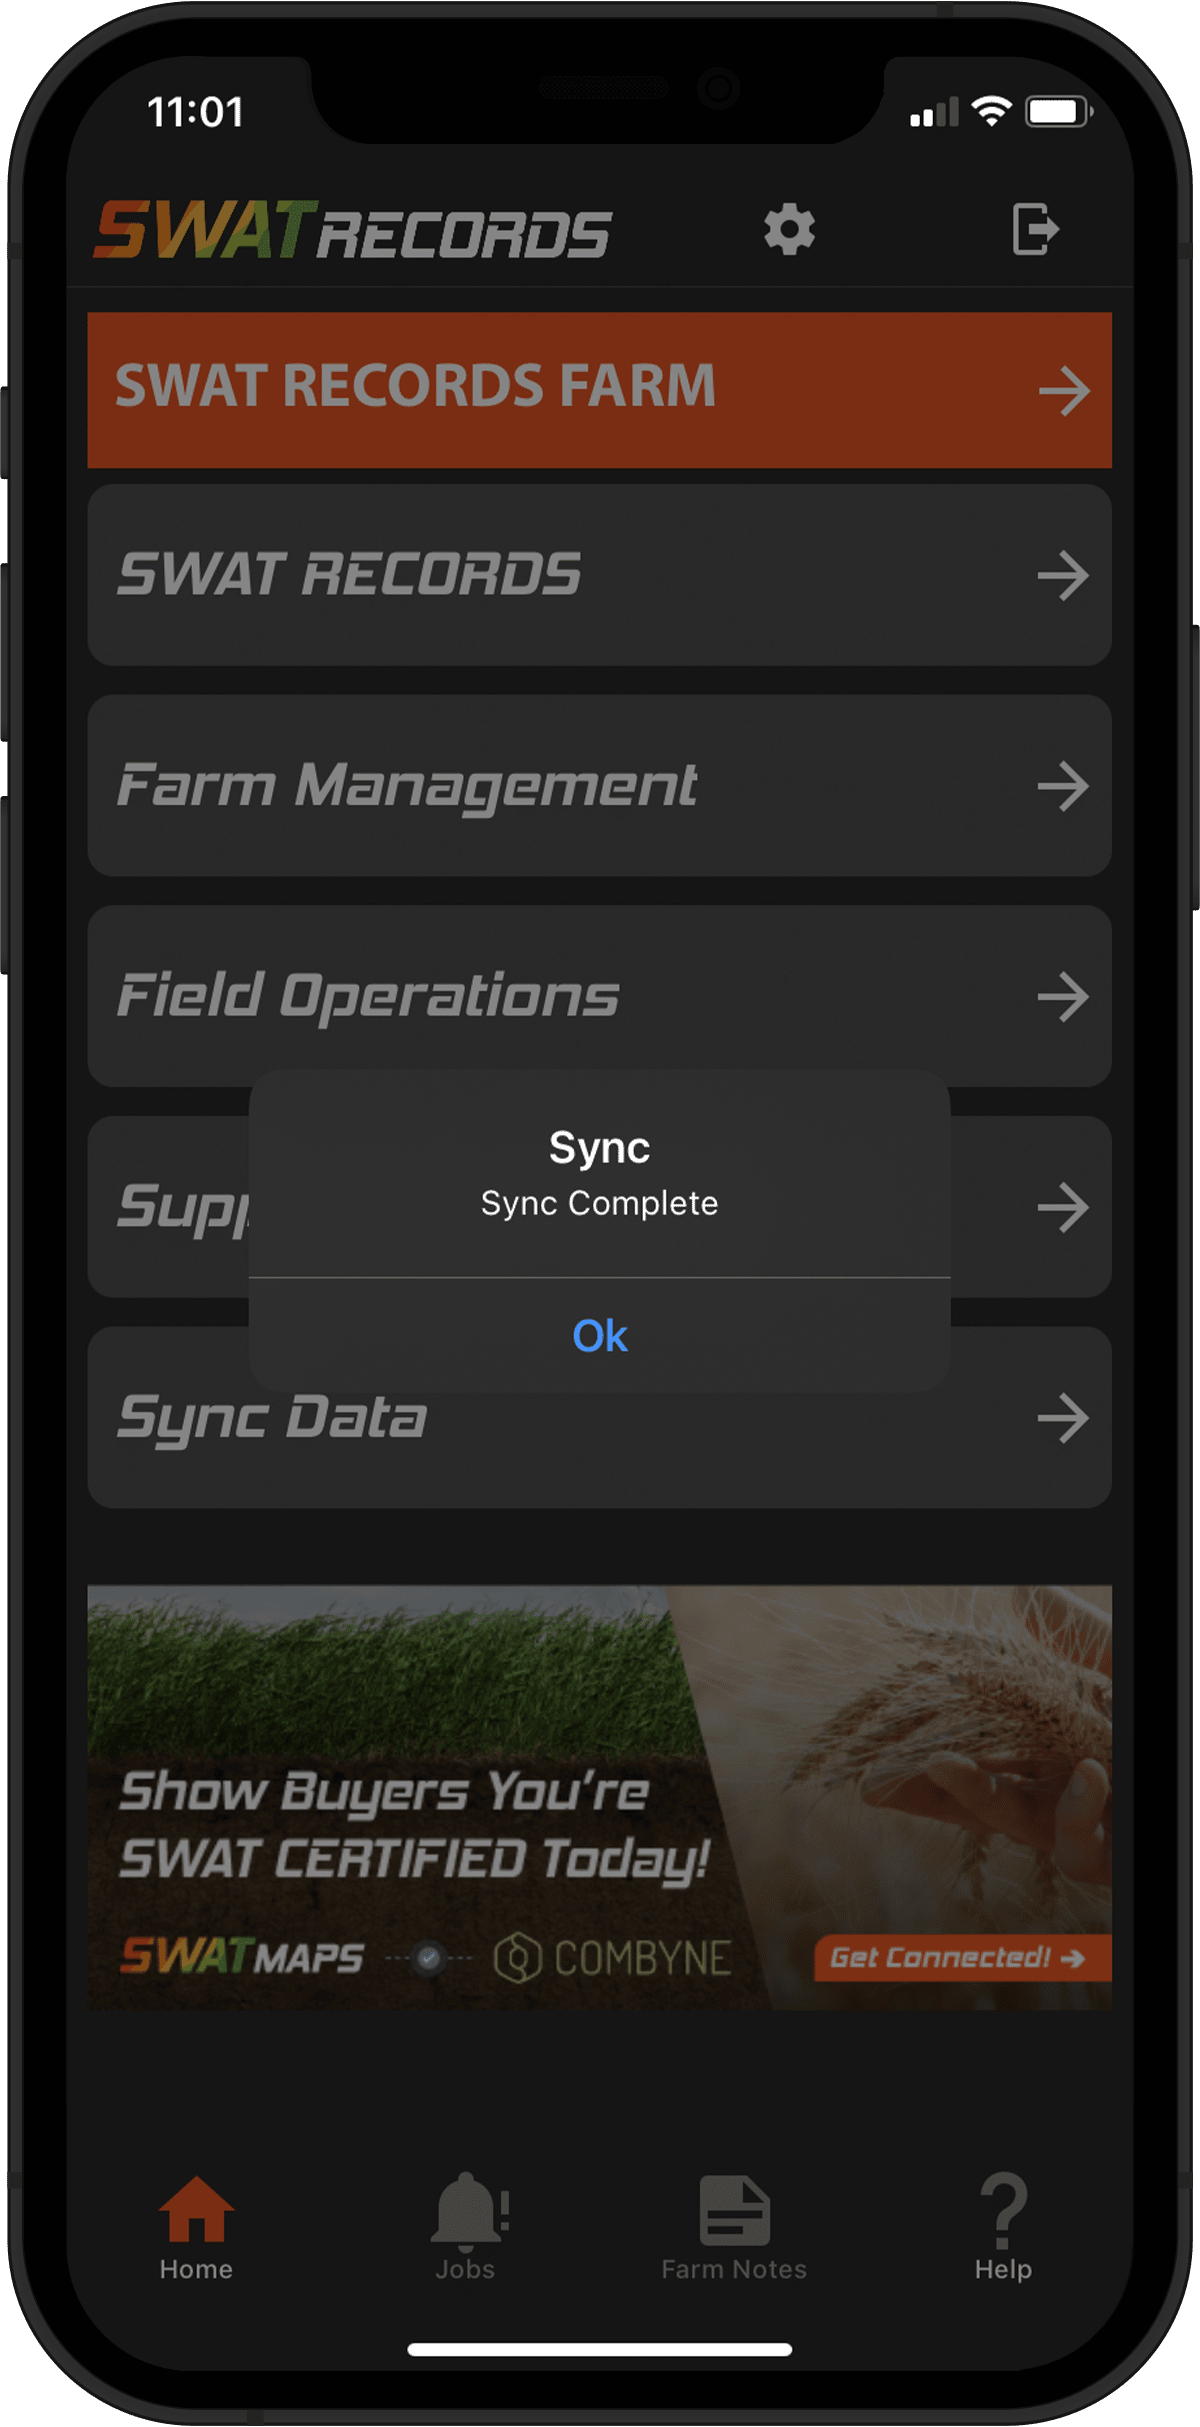 Image of SWAT RECORDS app on a phone